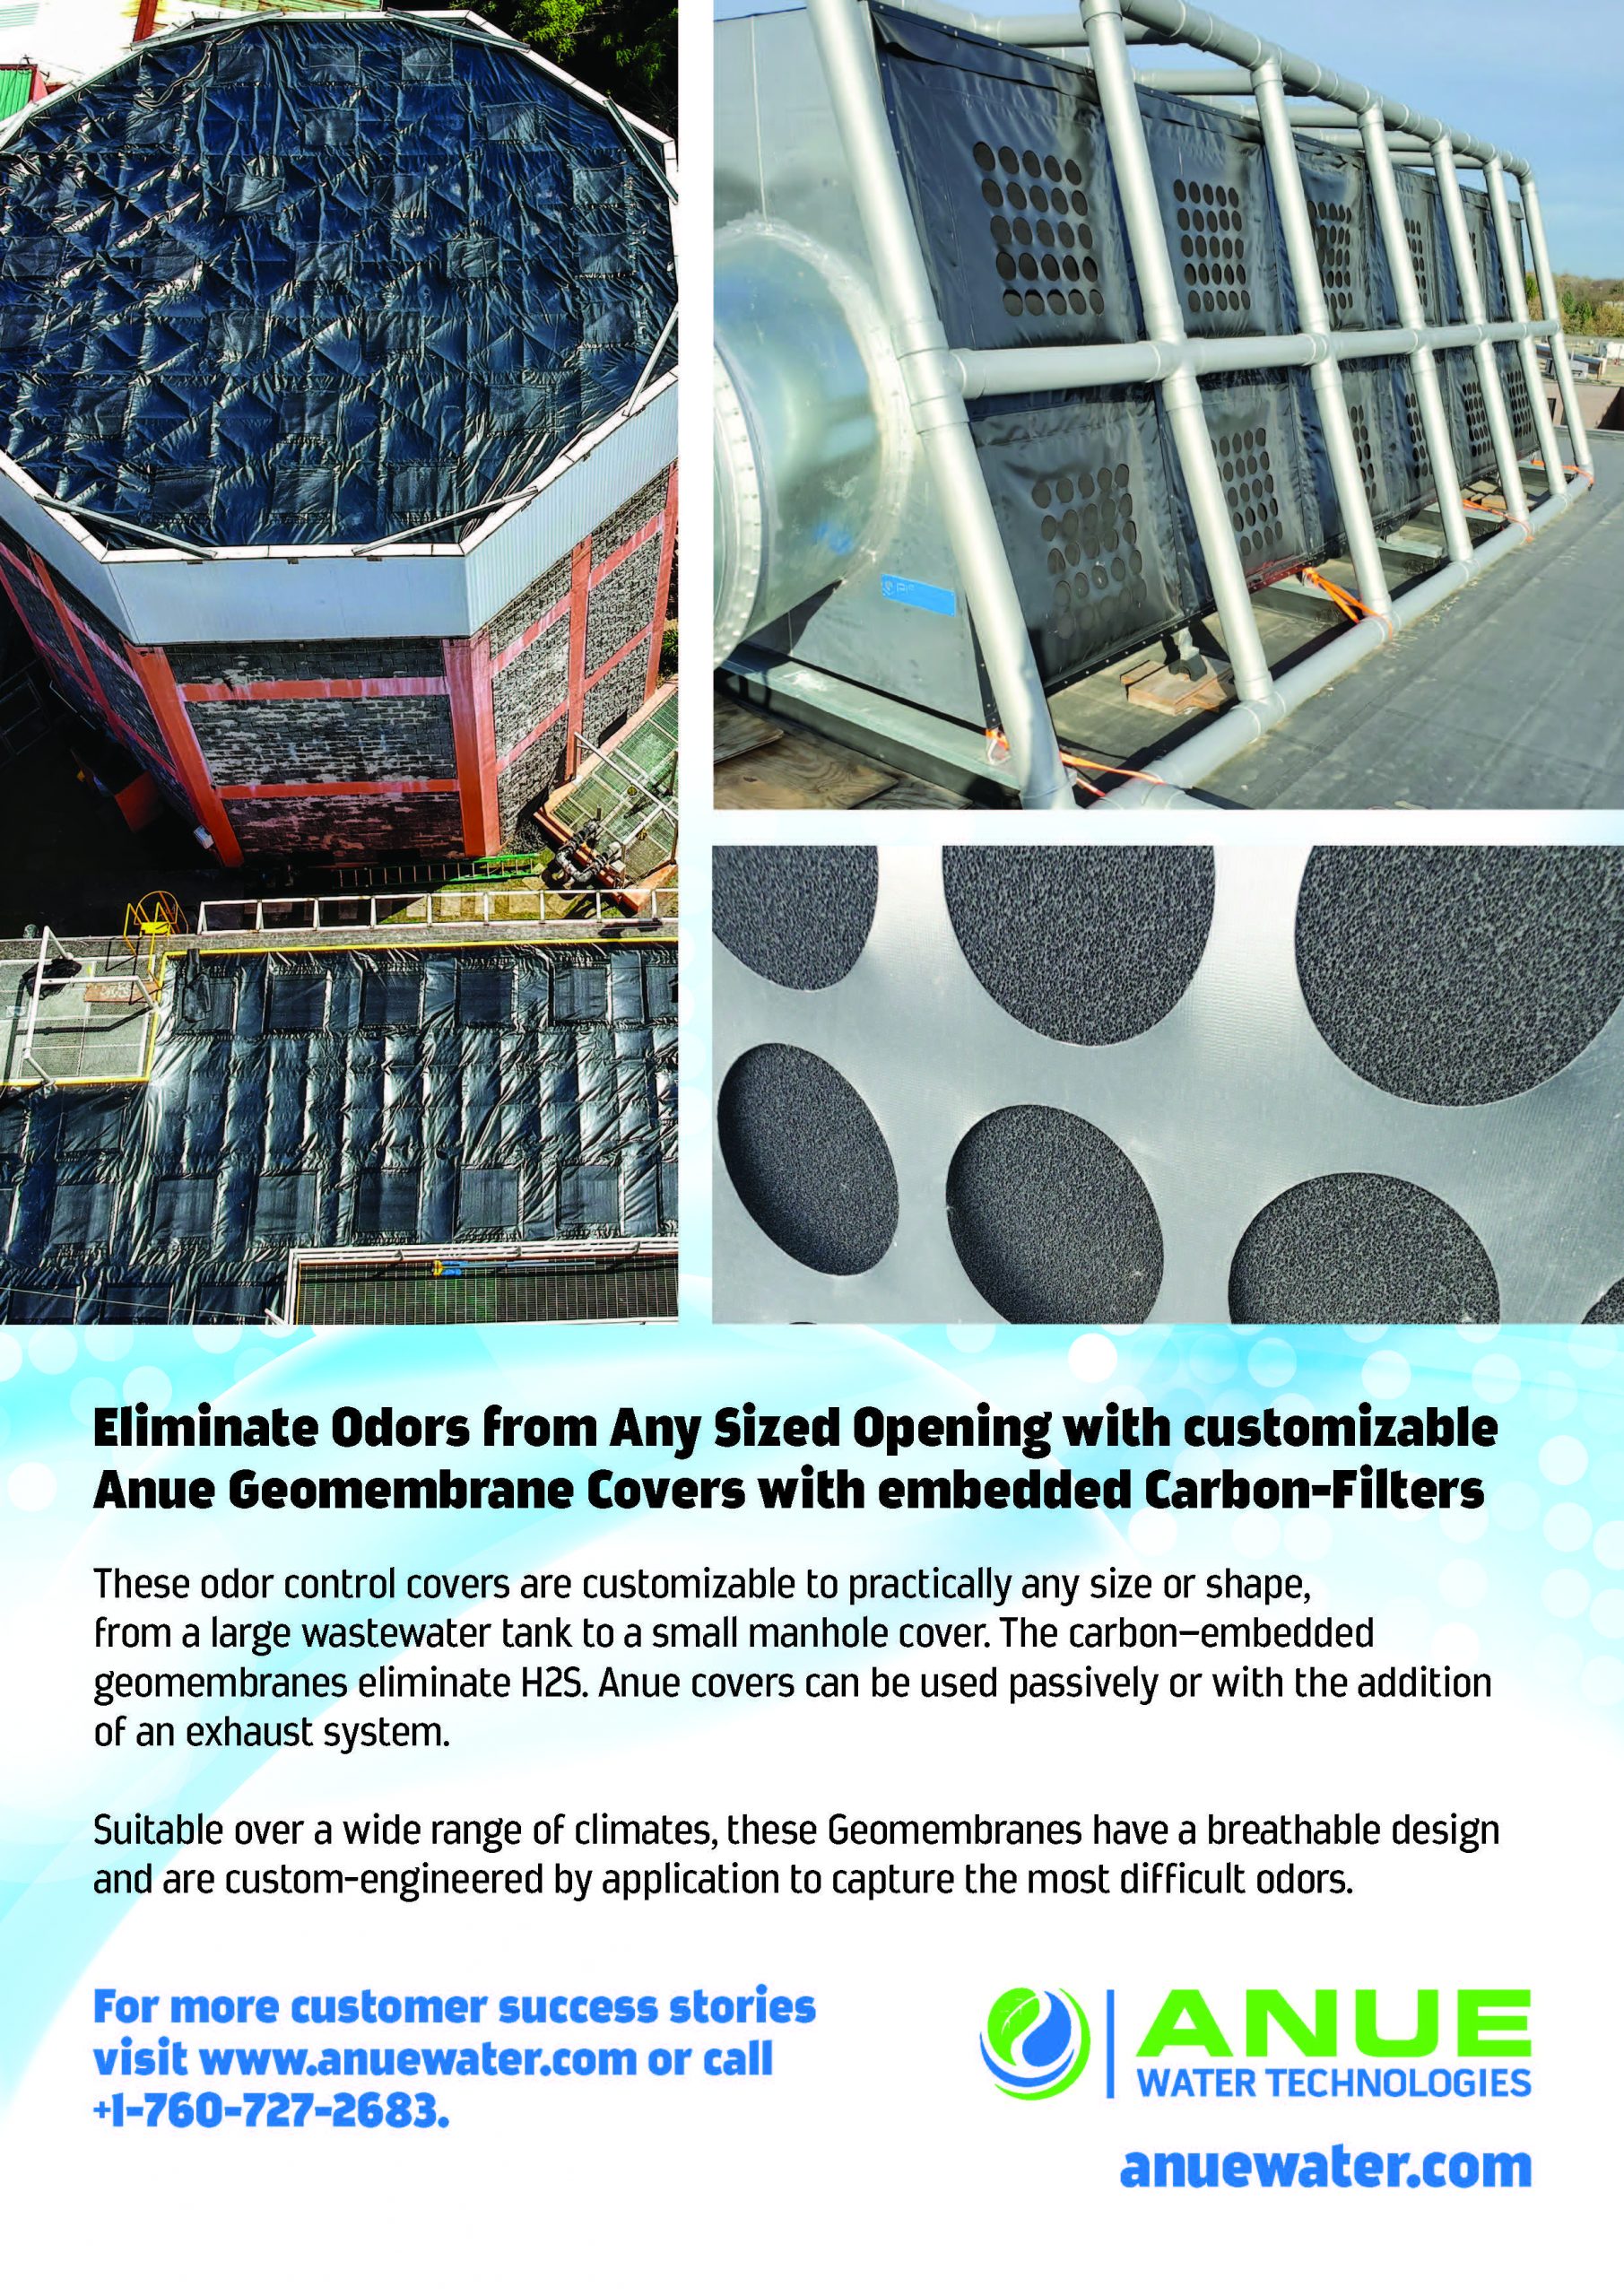 Geomembrane Covers Wastewater Treatment Service Ad 2021 FullPg_FINAL FINAL 01.21[1]